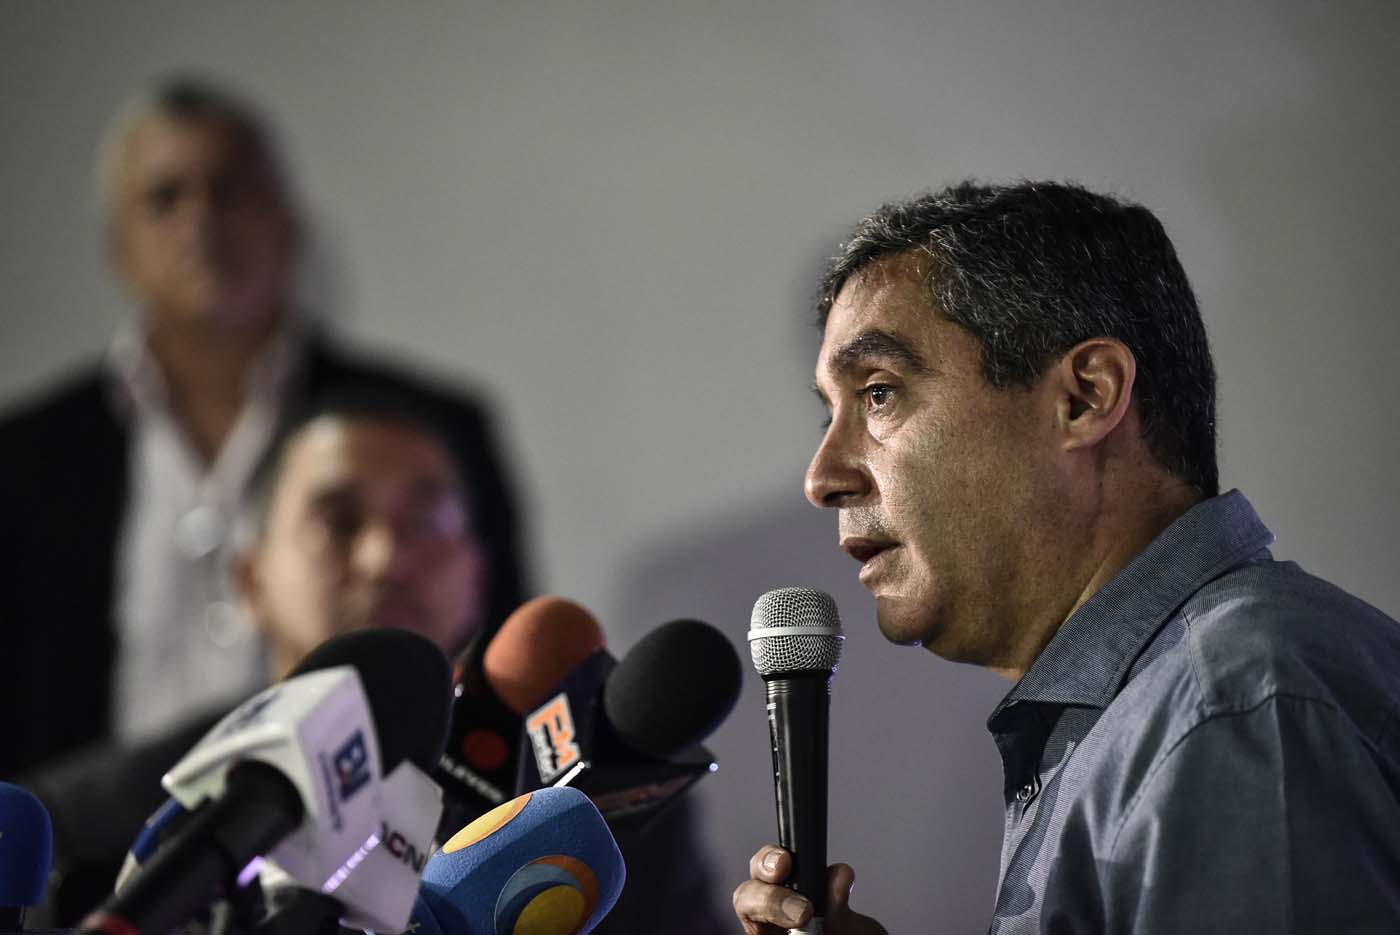 Venezuela's former intelligence chief (1999-2013) and Interior and Justice Minister (2013-2014), retired general Miguel Rodriguez, speaks during a press conference in Caracas on June 27, 2017 in which he denied accusations by President Nicolas Maduro of his involvement in an alleged coup plot to promote a US military intervention. A political and economic crisis in the oil-producing country has spawned often violent demonstrations by protesters demanding President Nicolas Maduro's resignation and new elections. The unrest has left 76 people dead since April 1. / AFP PHOTO / CARLOS BECERRA